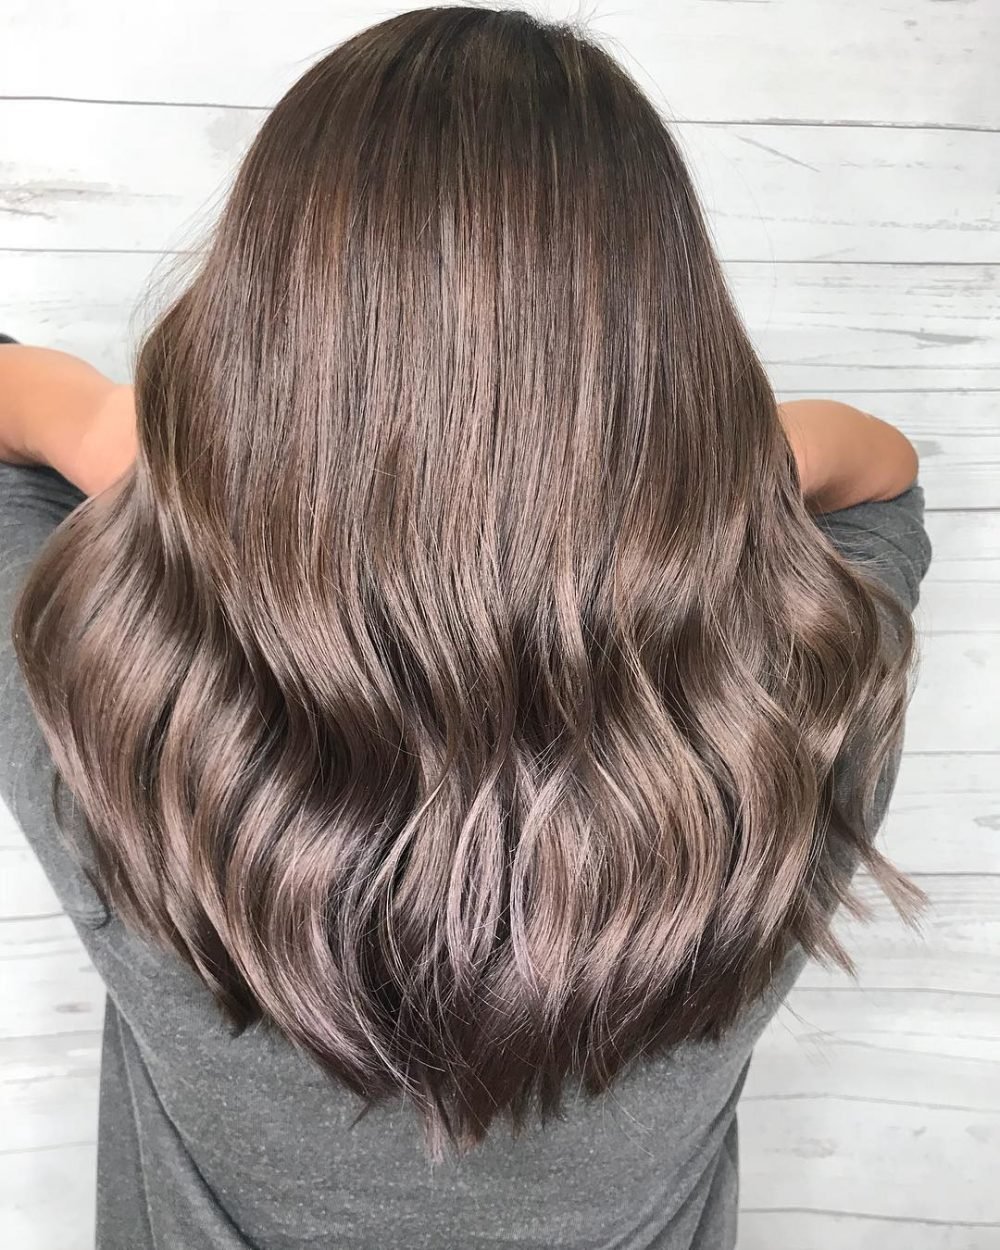 30 Gorgeous Ash Brown Hair Colors - The Trend You Need to Try